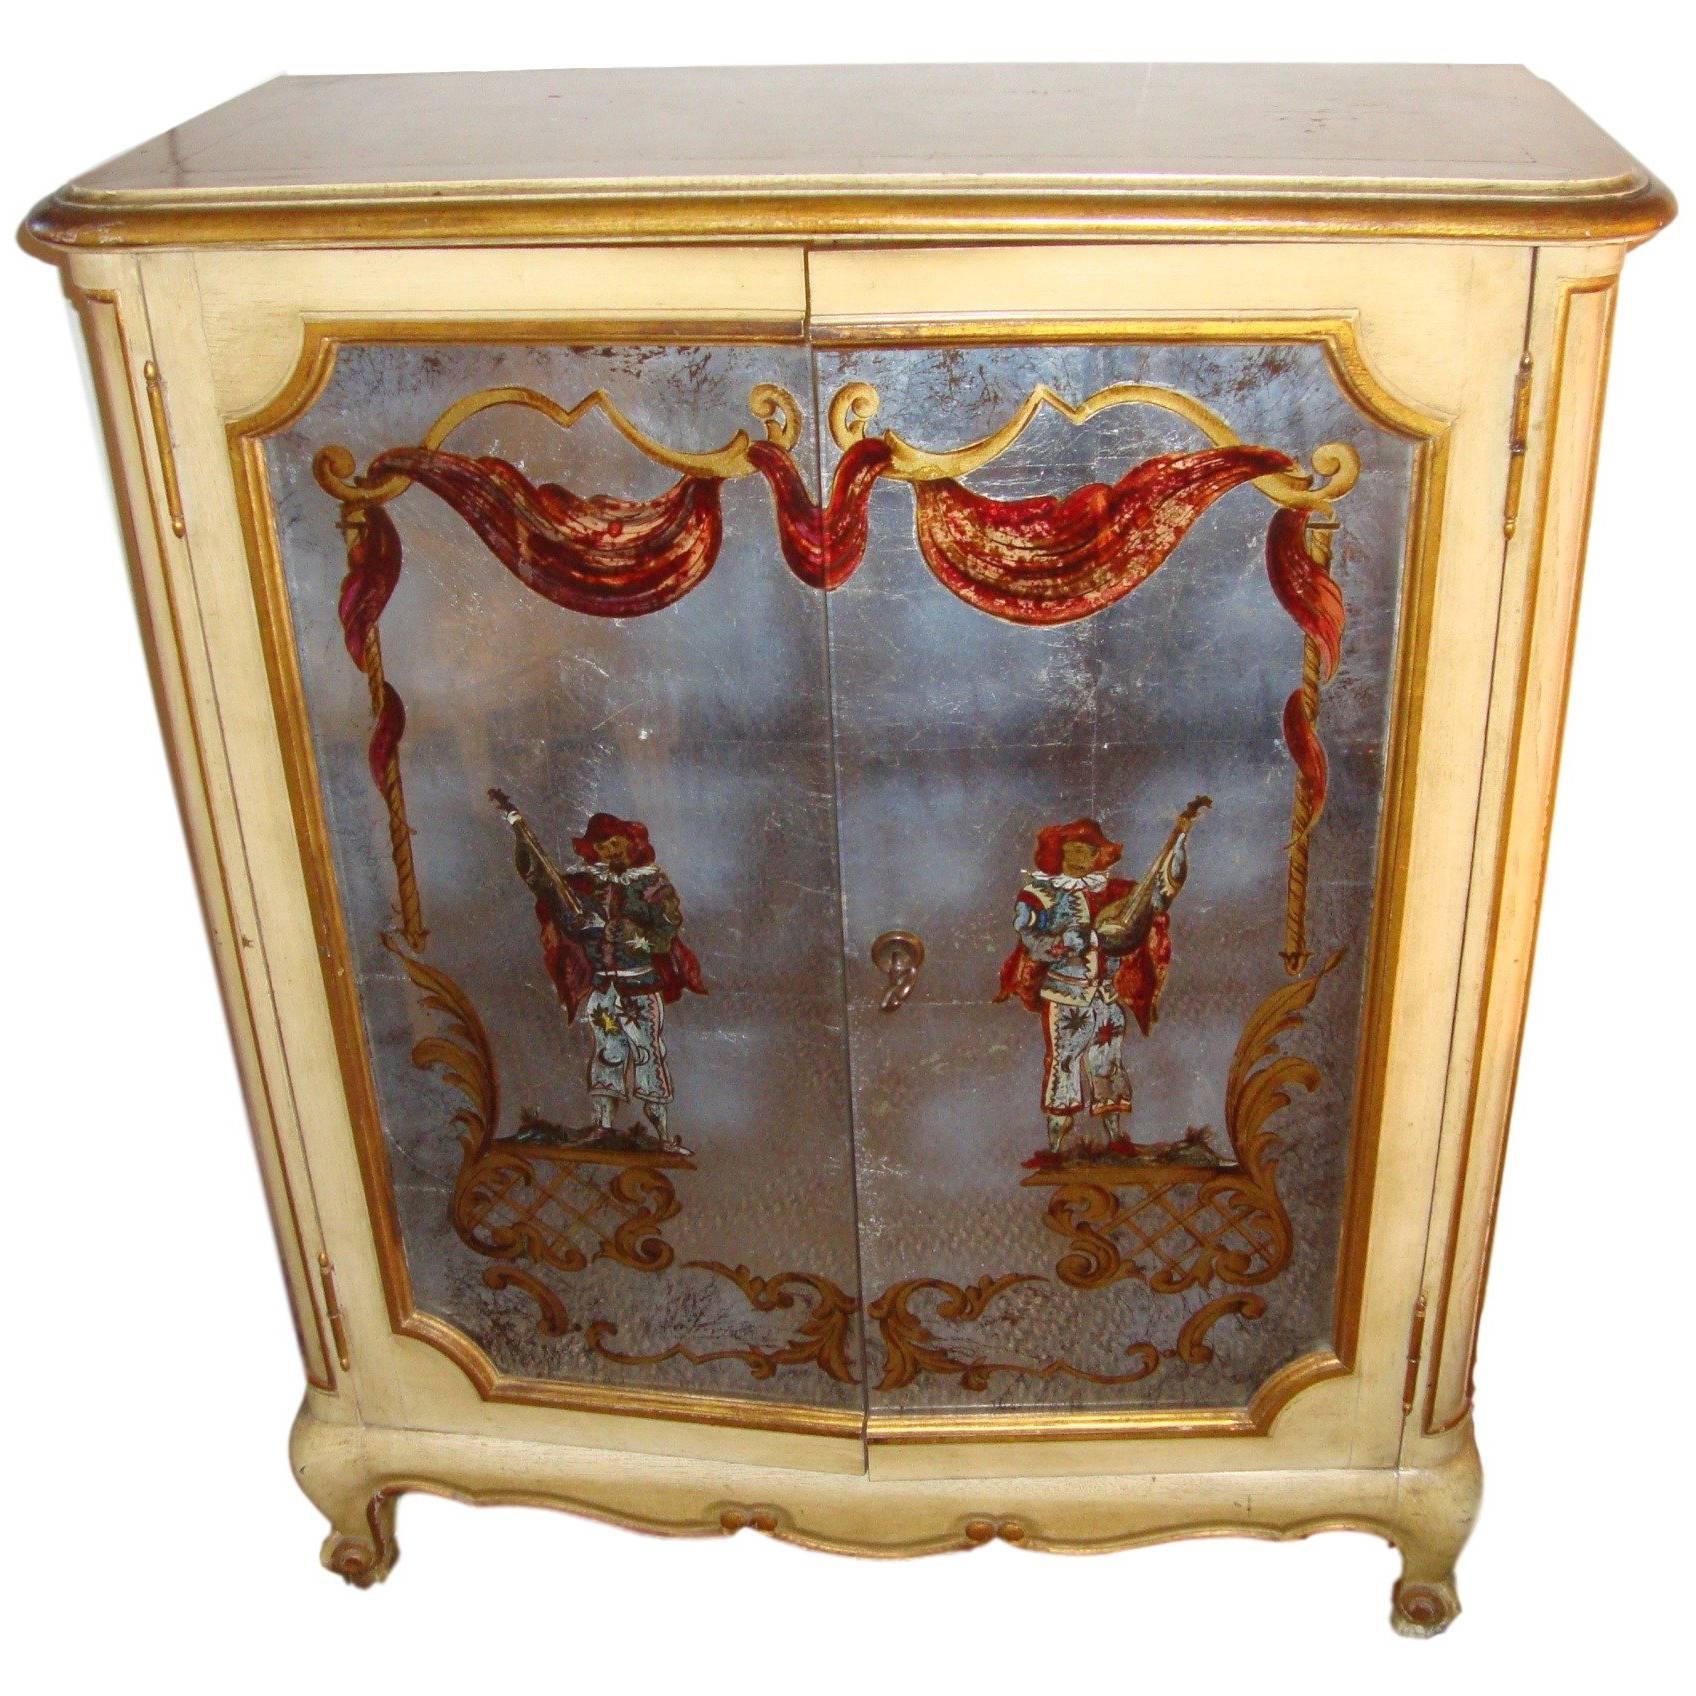 Maison Jansen Verrne Eglomise and Painted Cabinet Commode